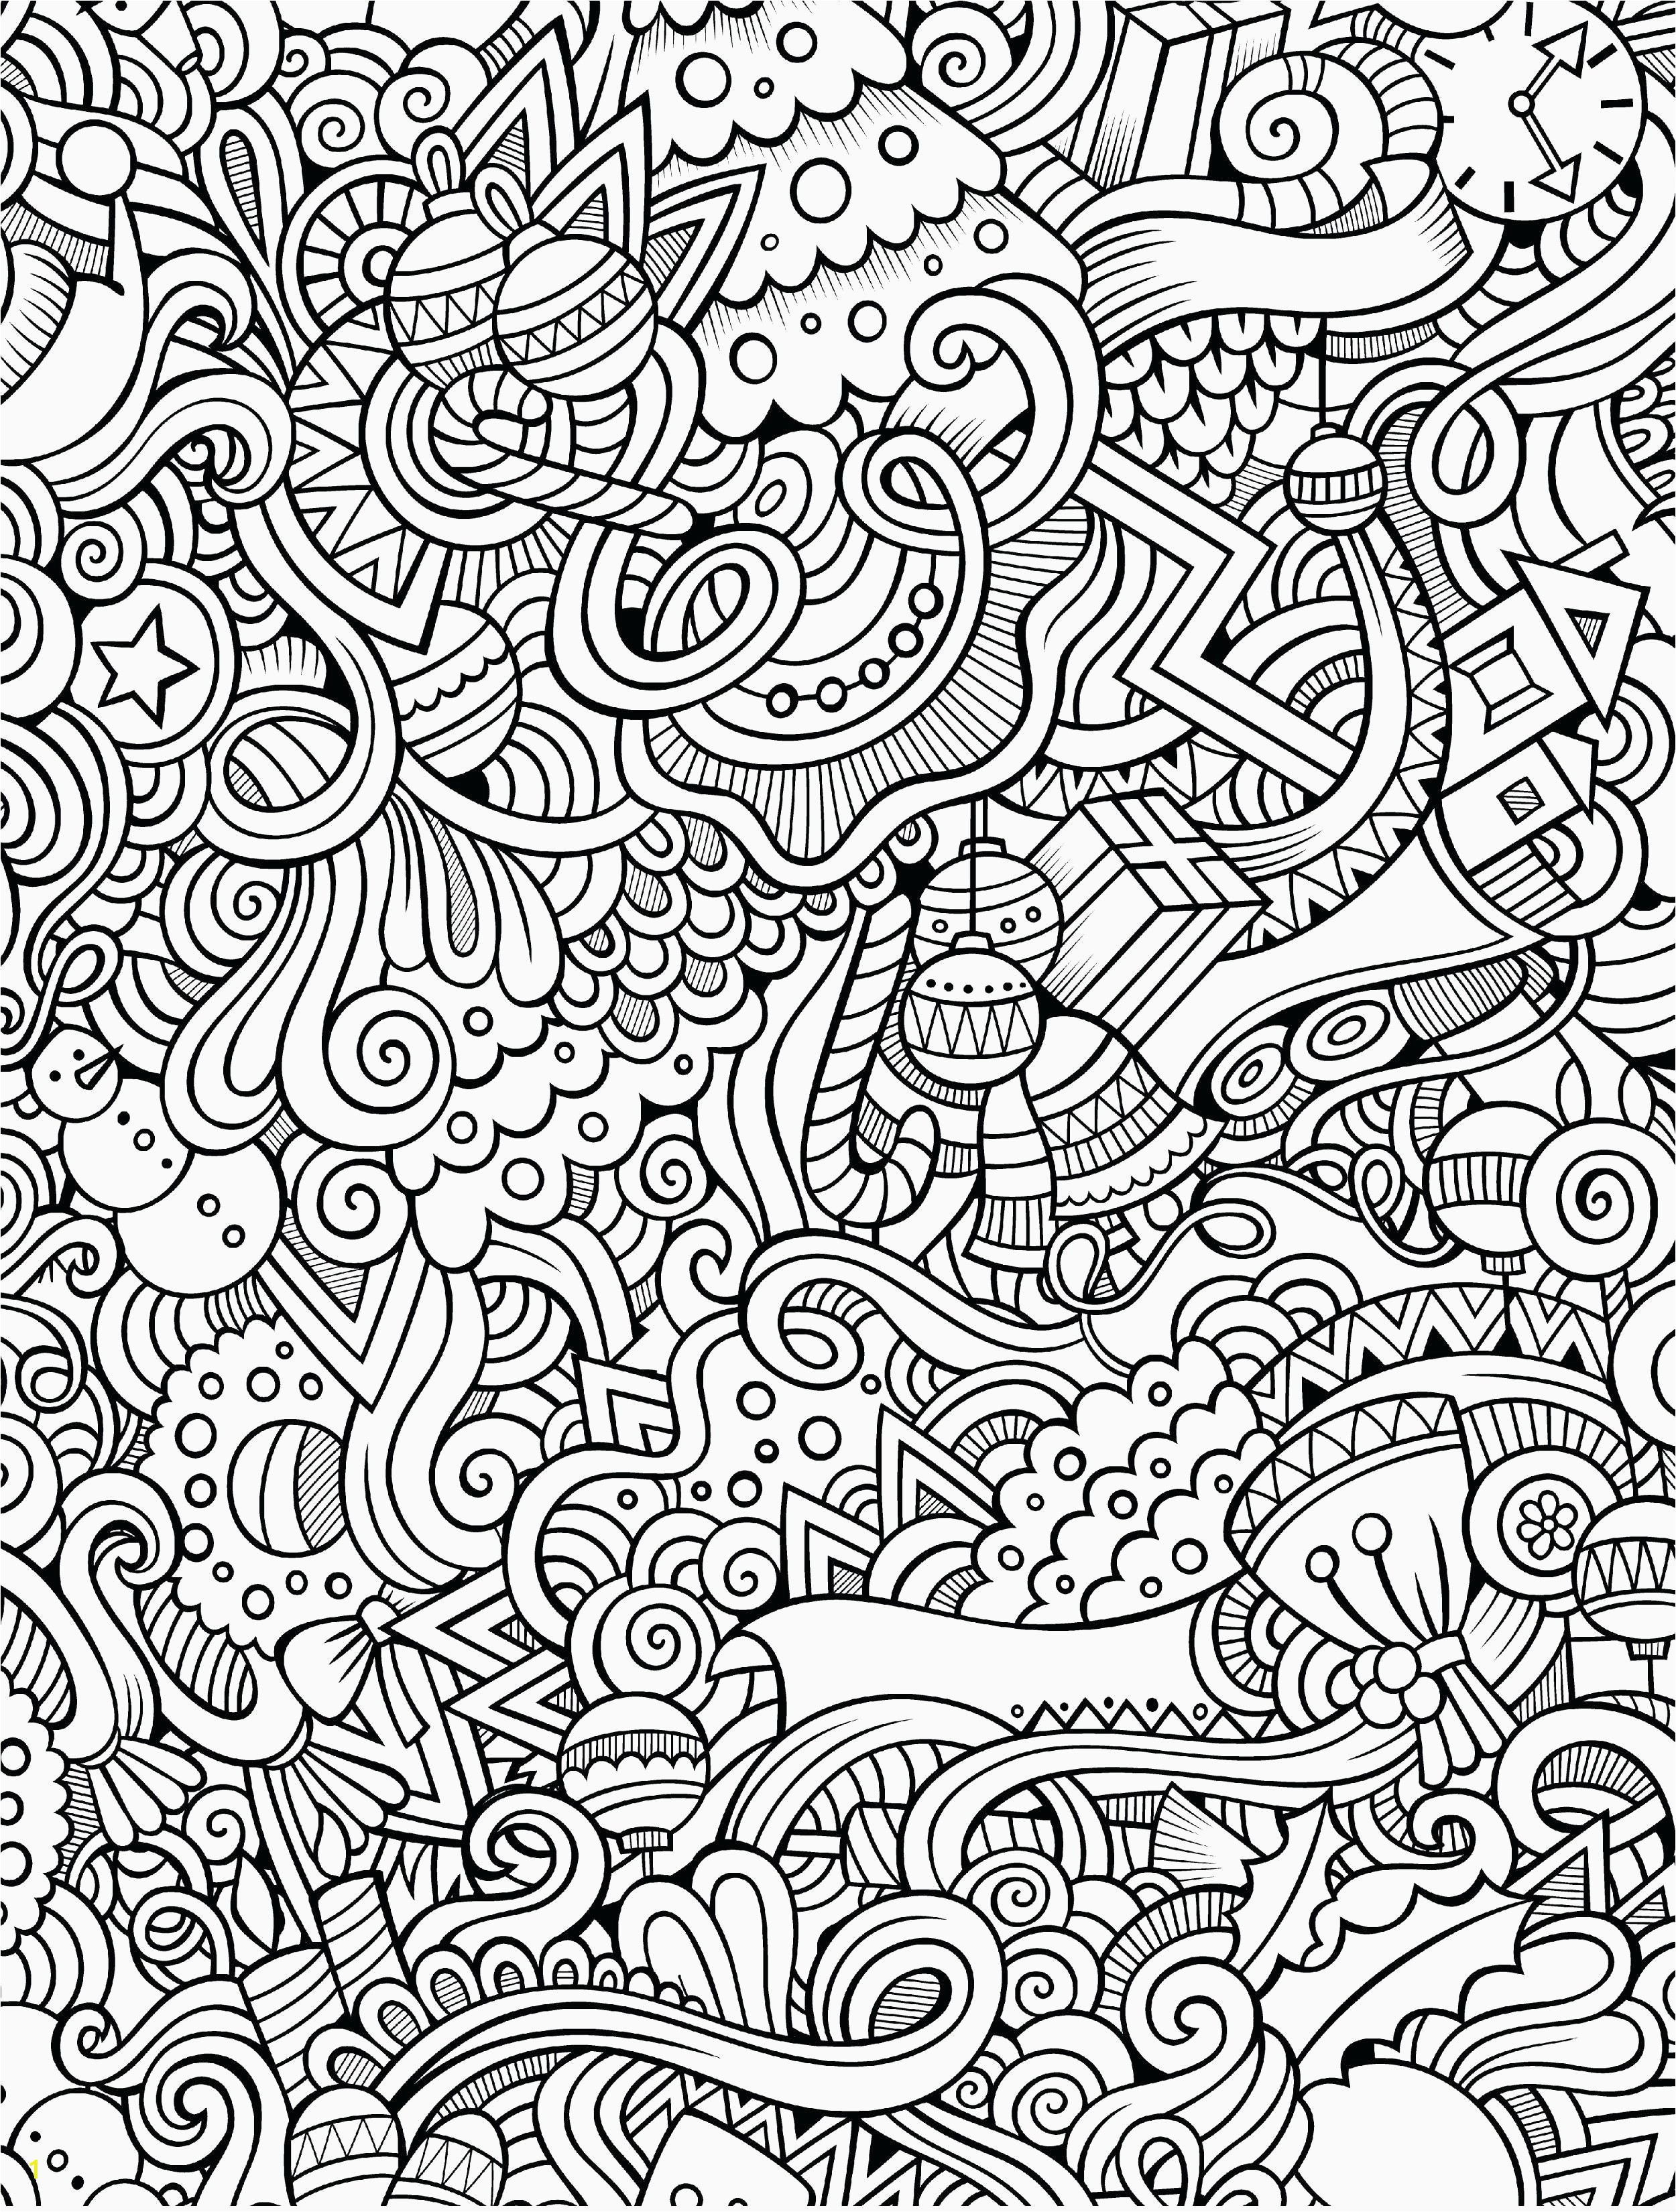 Coloring Pages to Print for Adults Beautiful Awesome Coloring Page for Adult Od Kids Simple Floral